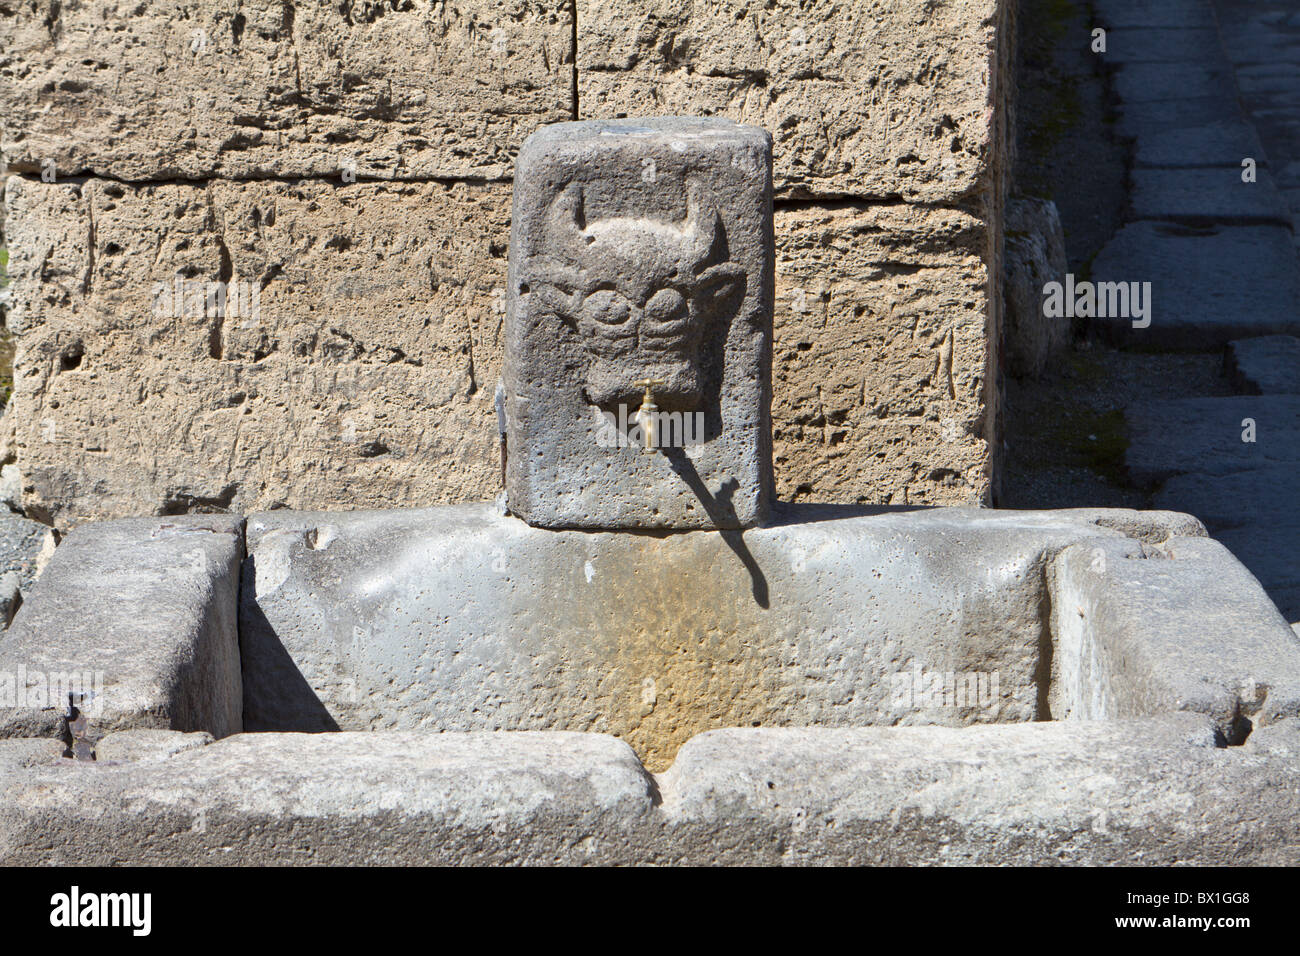 Stone water-trough in Pompeii with a carved stone figure depicting the head of a bull Stock Photo